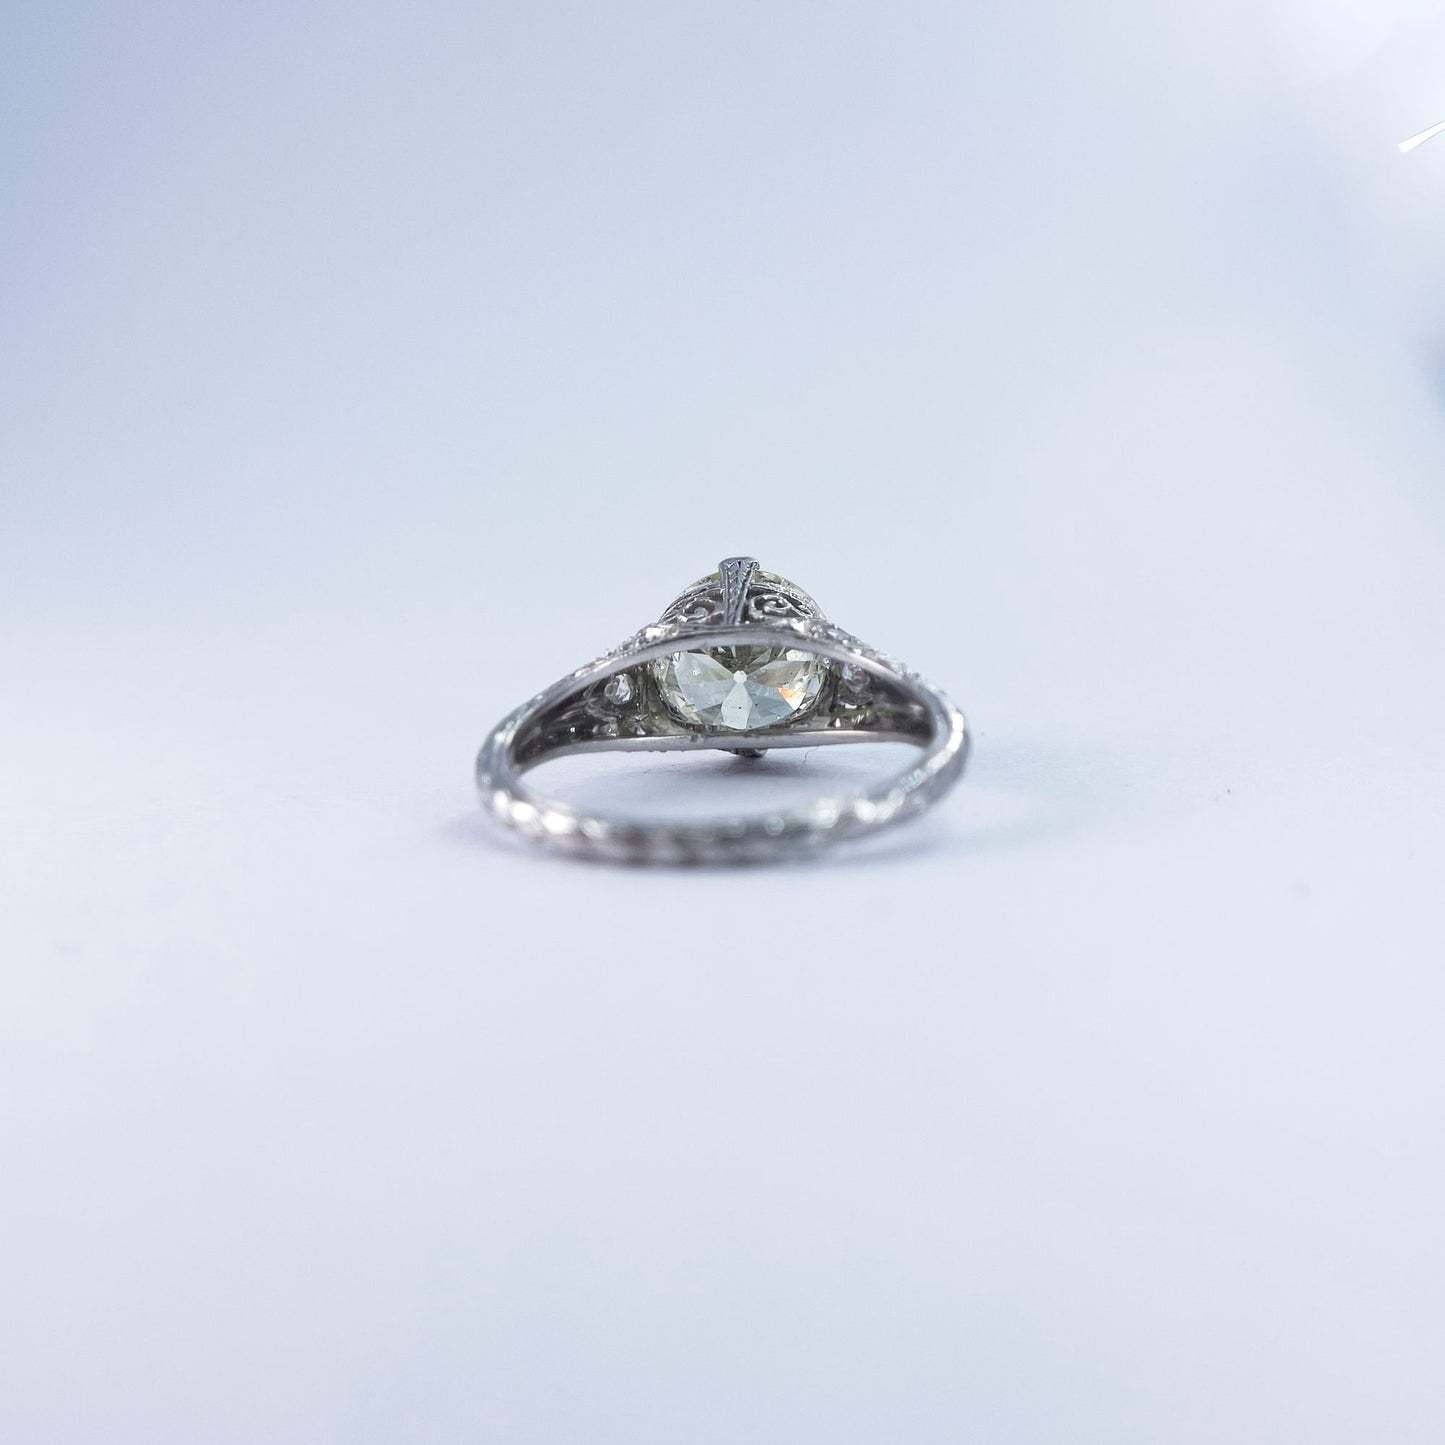 1920s Old European Round Cut Diamond Ring with Double Prong Setting and Filigree Band in Platinum